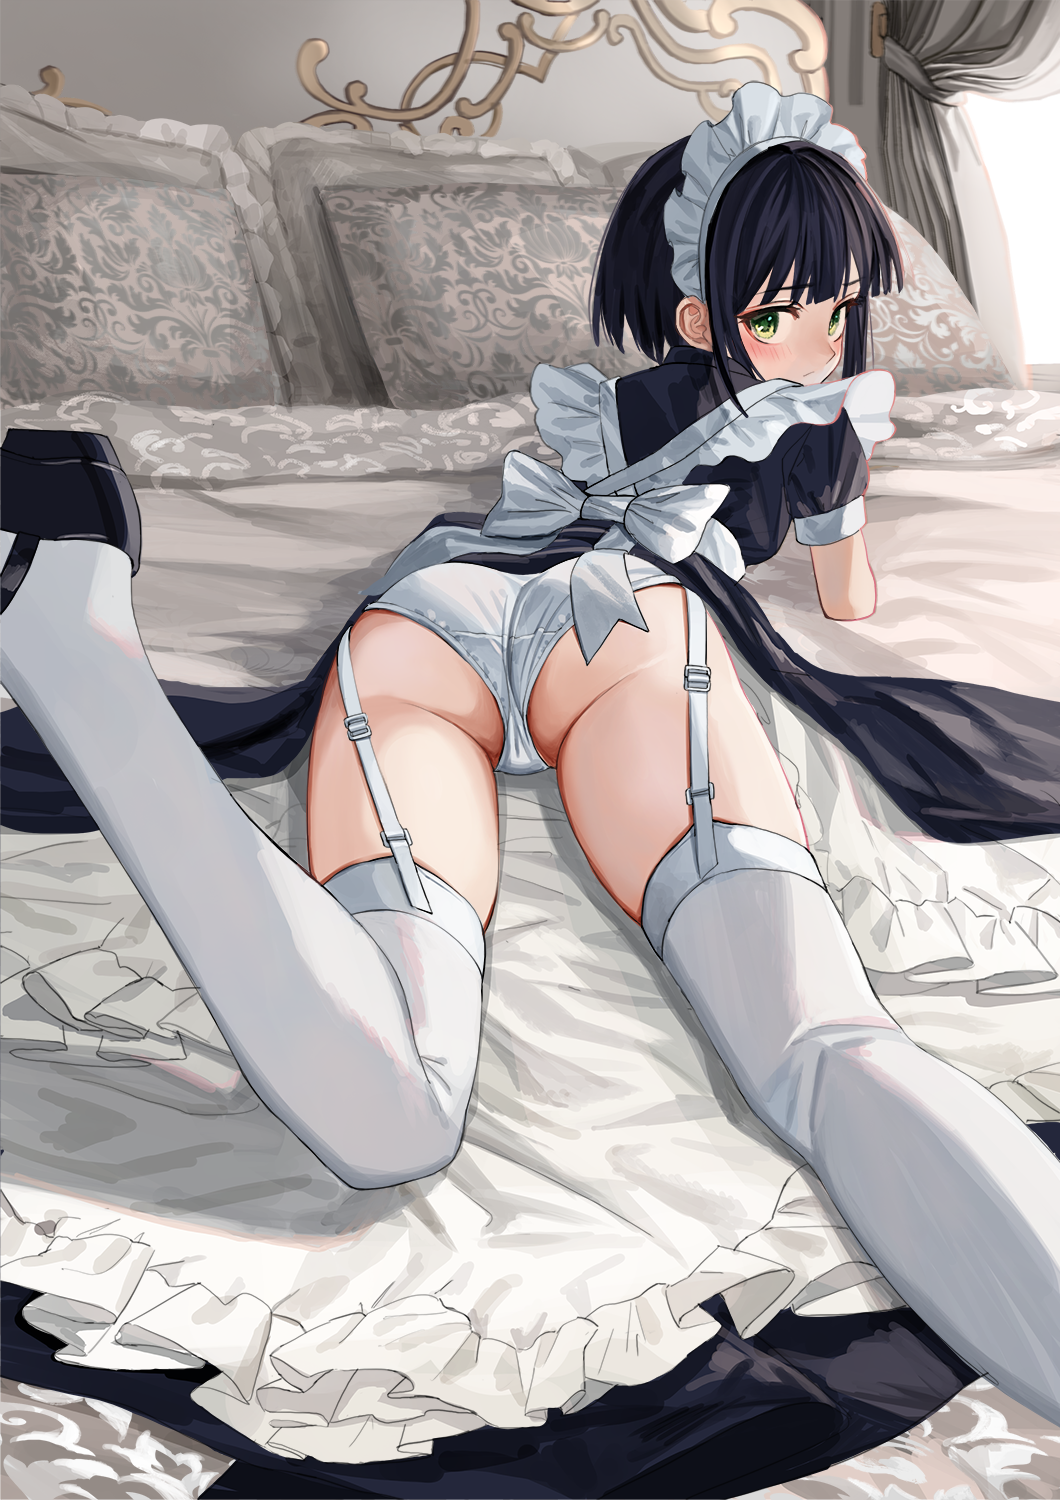 Anime 1060x1500 anime anime girls digital art artwork 2D portrait display maid outfit upskirt panties ass thigh-highs lying on front short hair black hair green eyes in bed Luicent